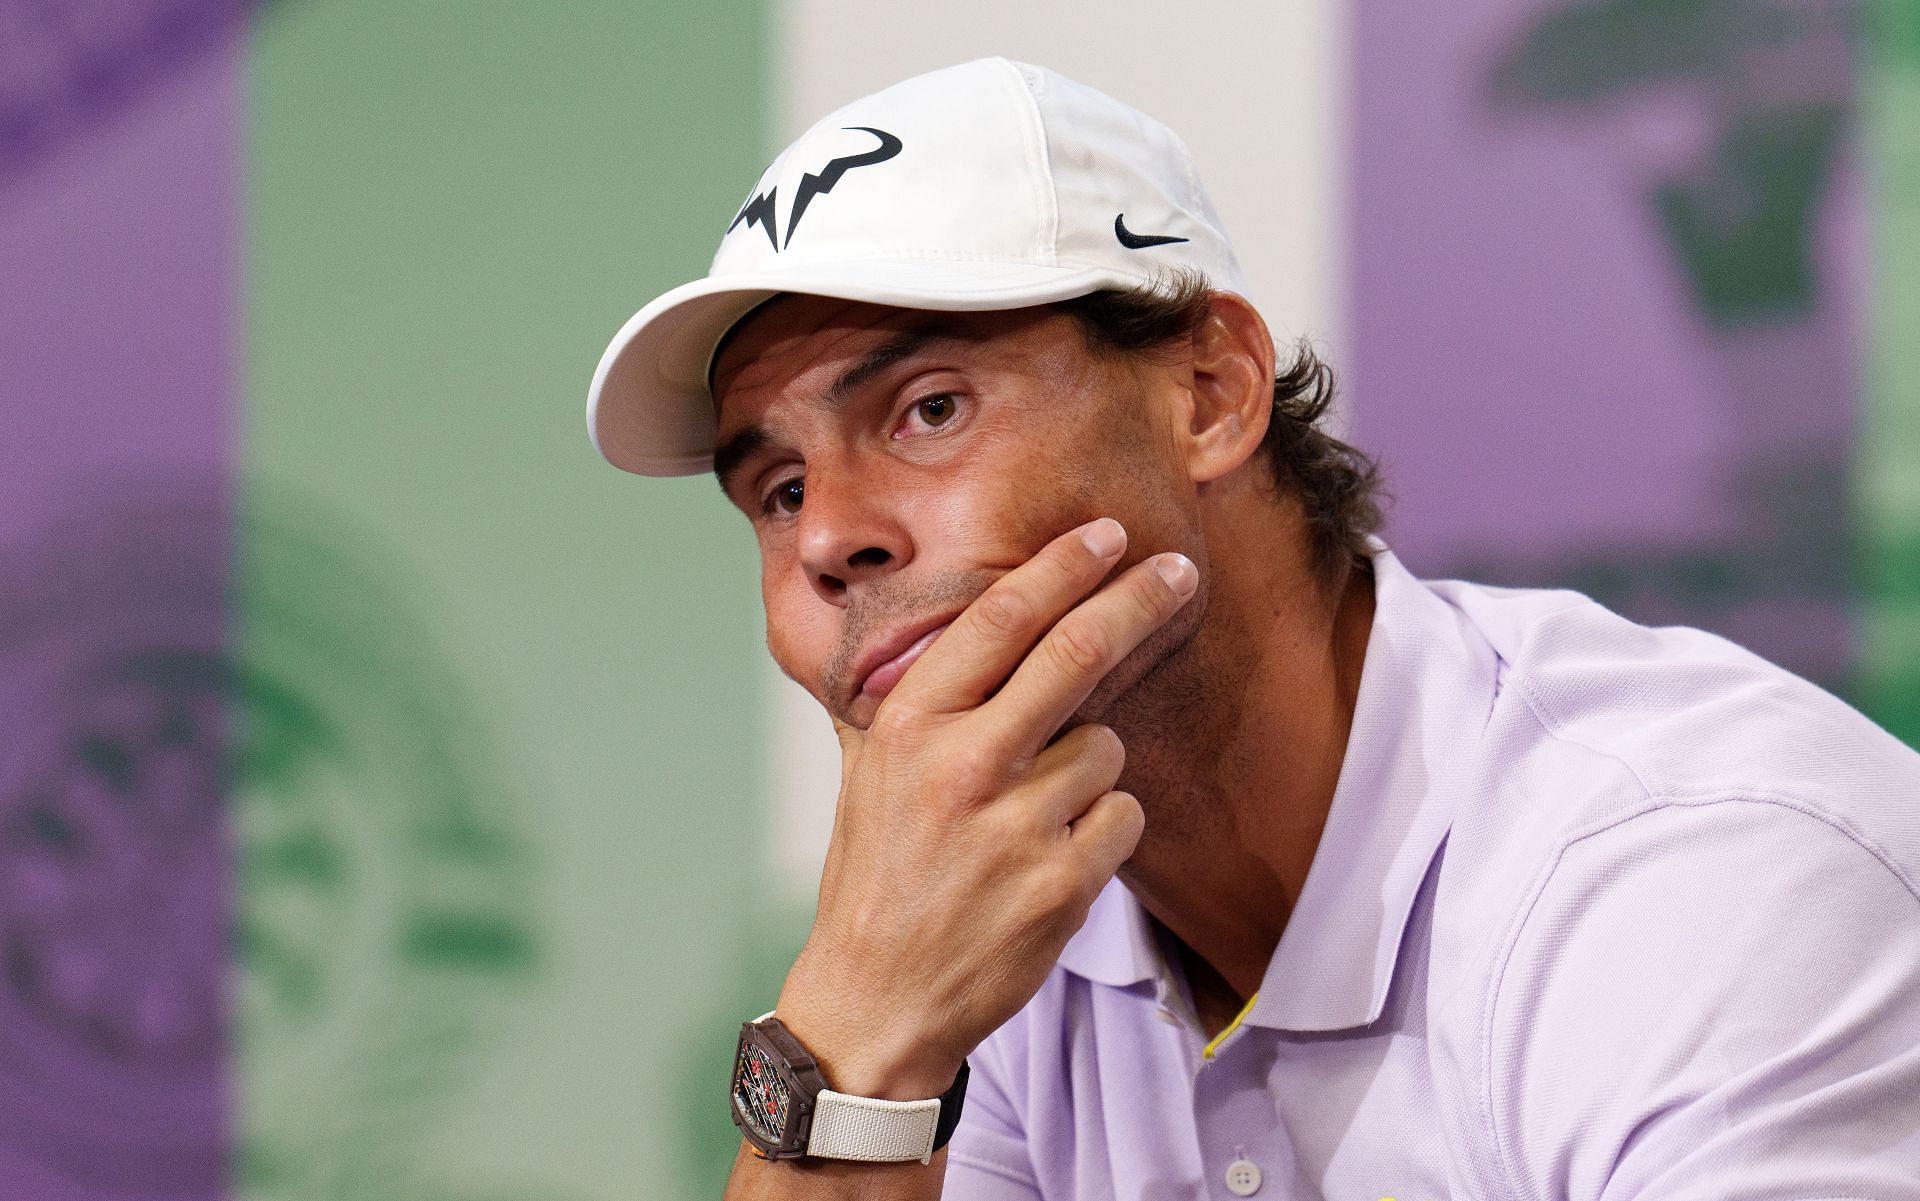 Rafael Nadal speaking to the media to announce his withdrawal at Wimbledon 2022